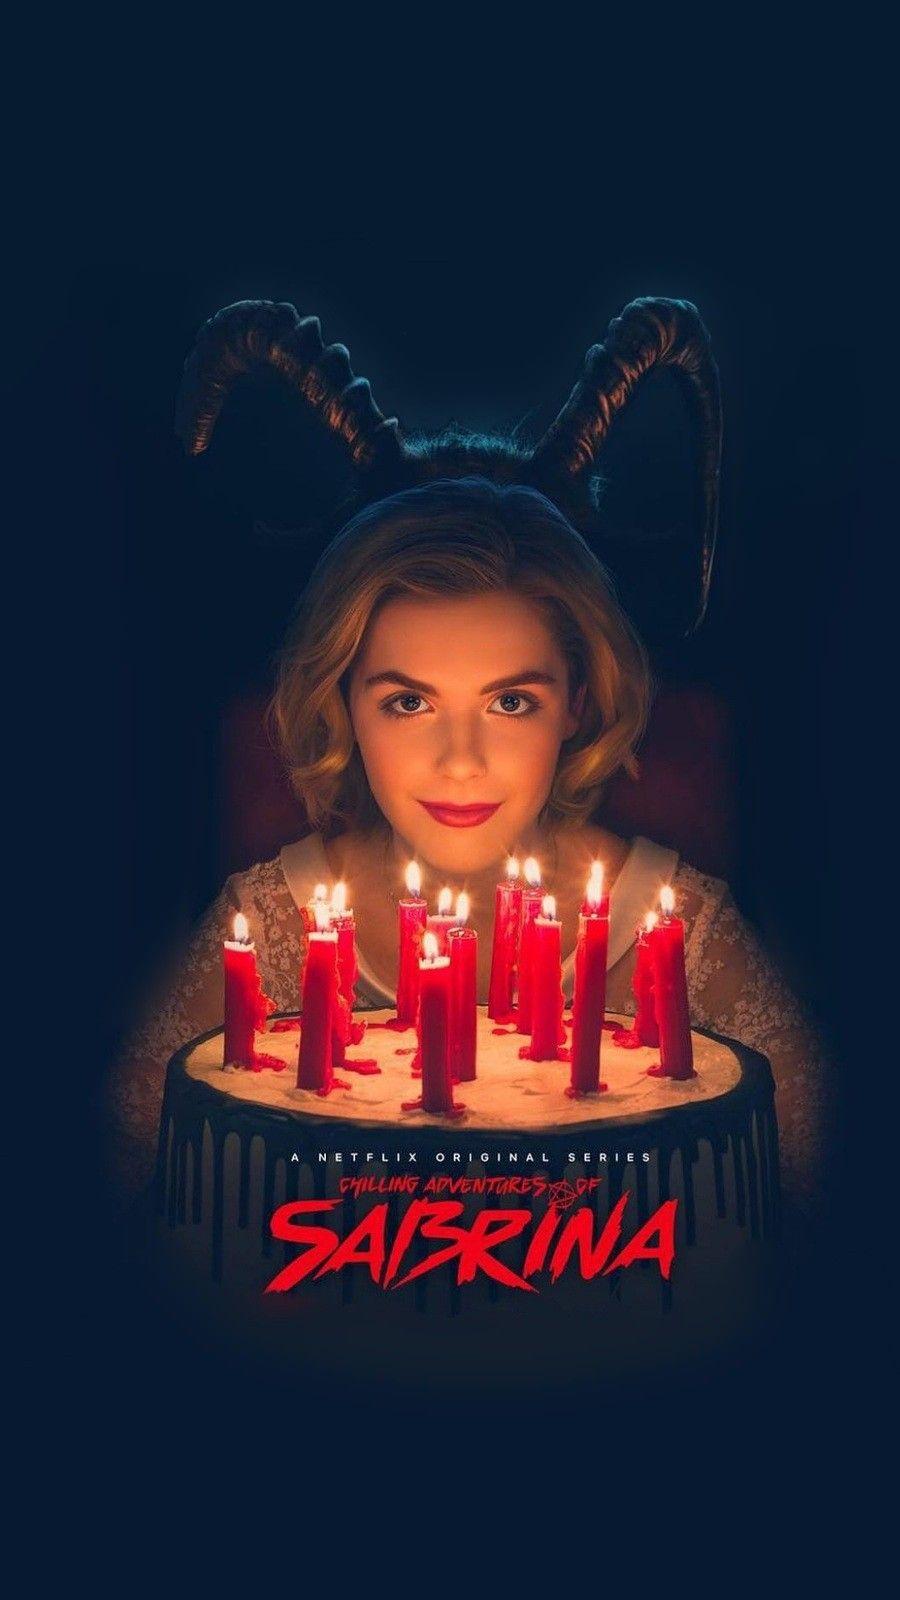 Chilling adventures of Sabrina Wallpaper. The chilling adventures